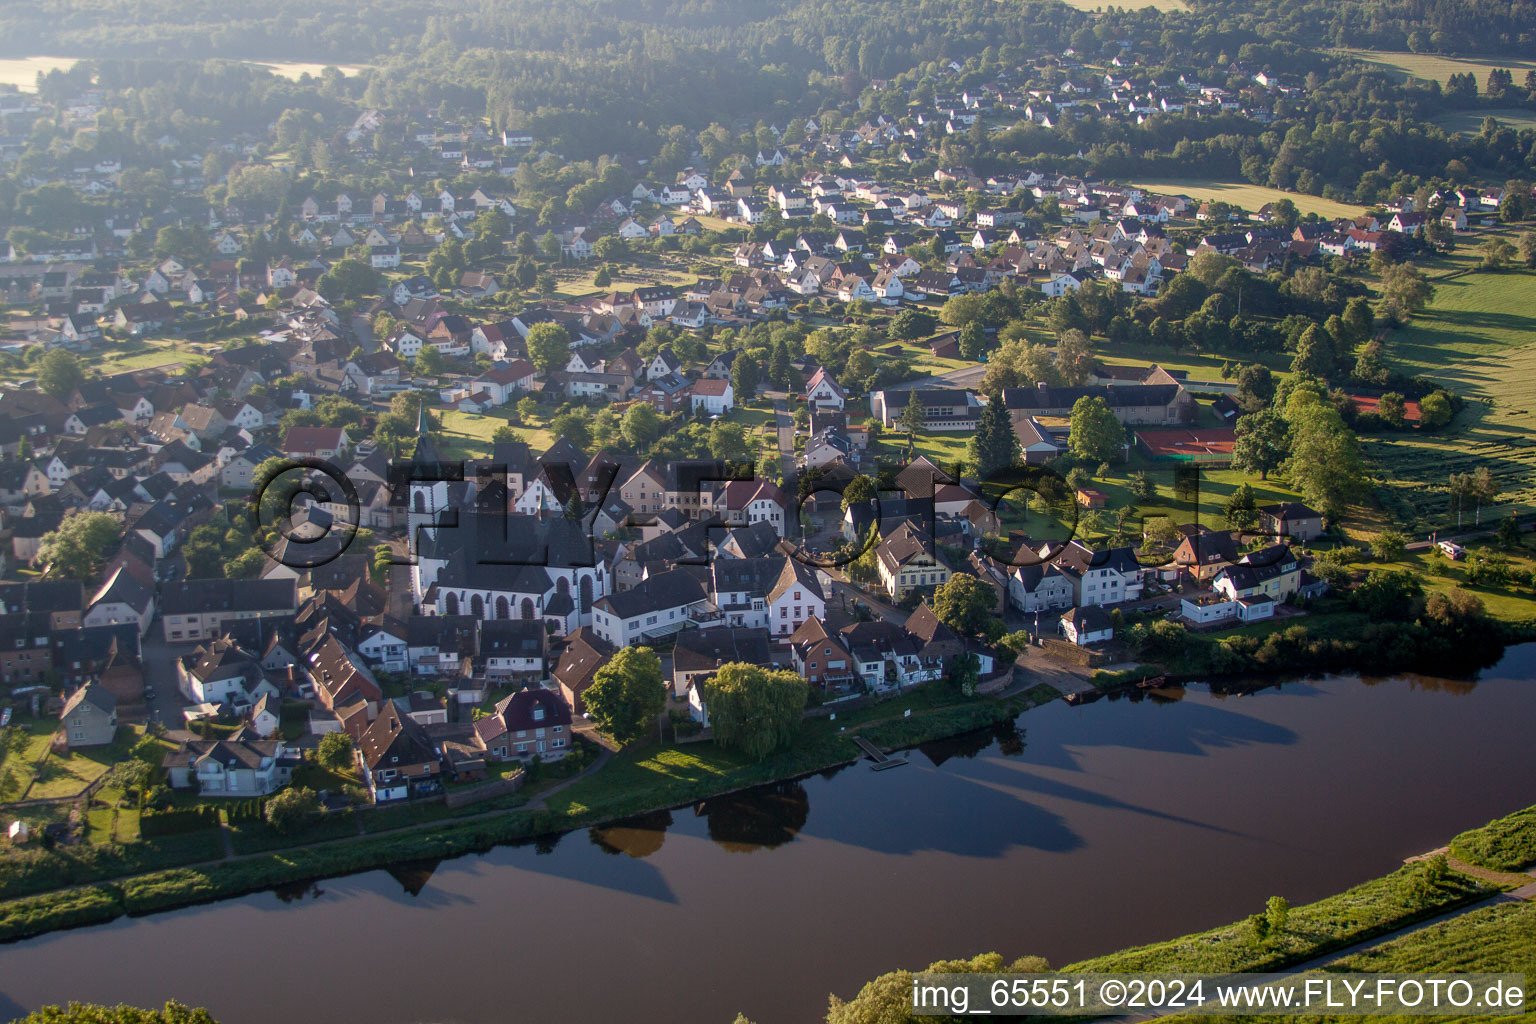 Aerial view of Town on the banks of the river of the Weser river in the district Luechtringen in Hoexter in the state North Rhine-Westphalia, Germany